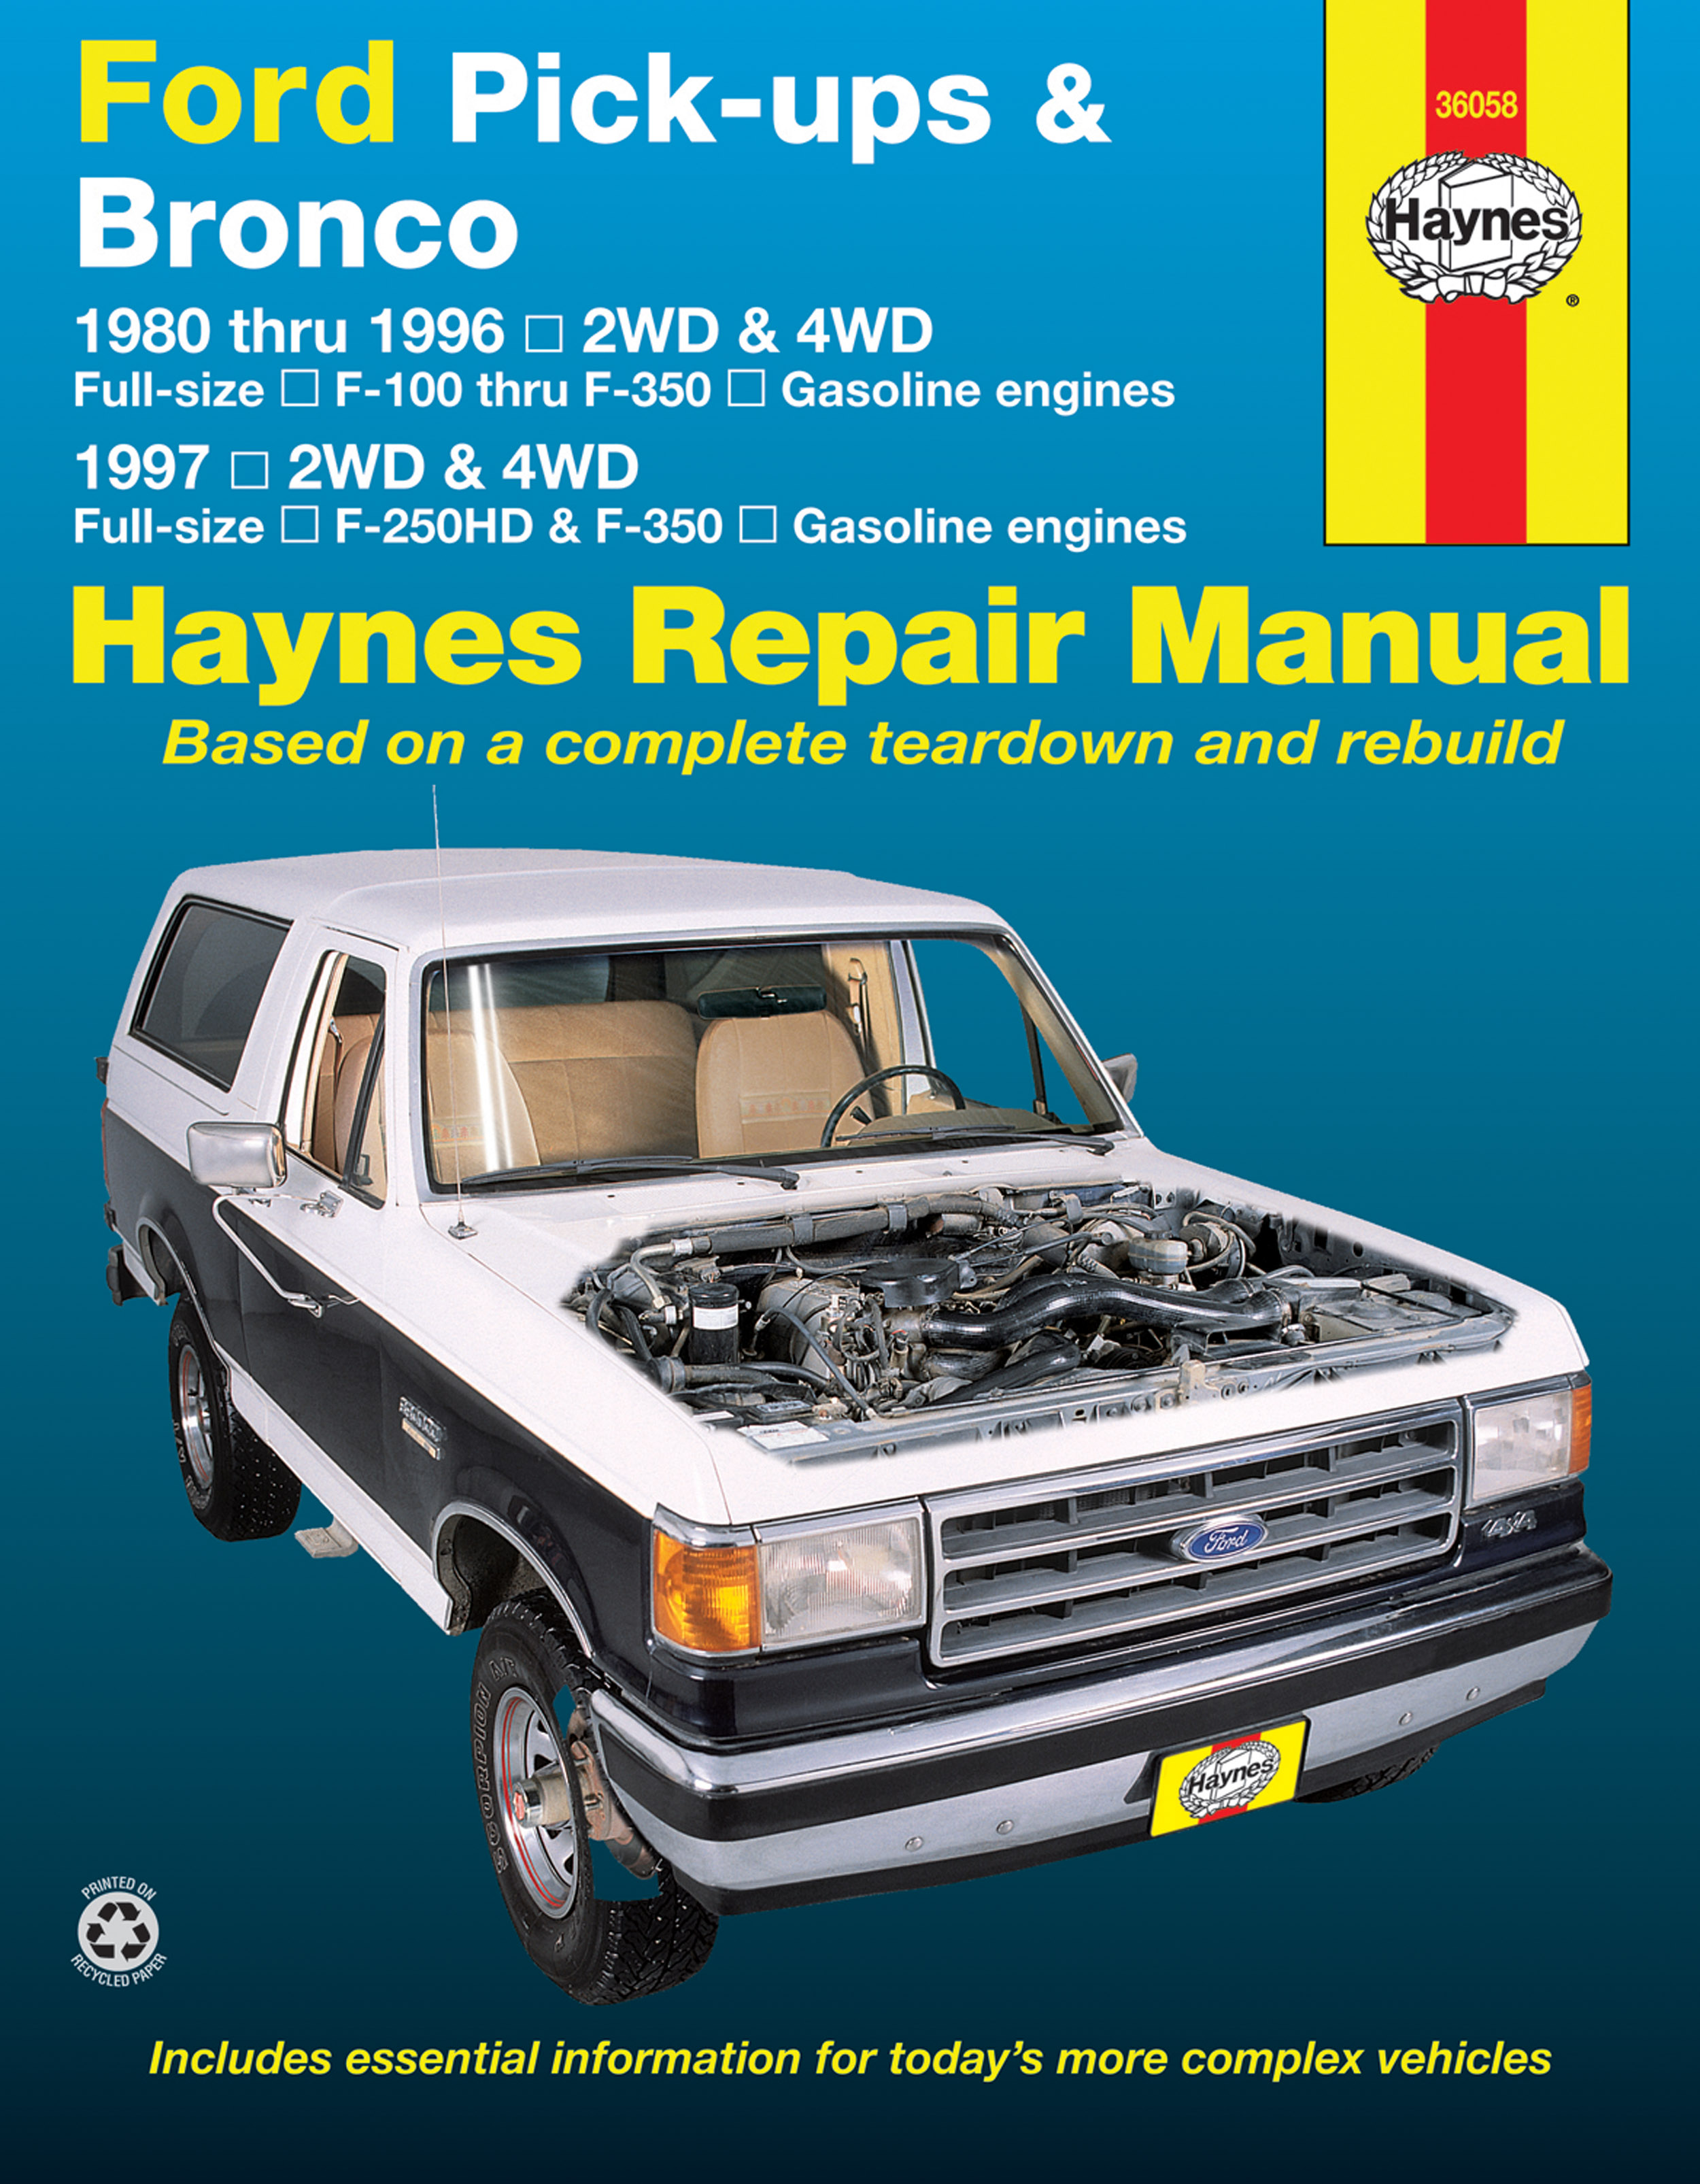 Ford F-150 Haynes Repair Manuals & Guides  Ford F150 1996 Wiring Diagram Pdf Full Free    Ford F-150 Haynes Repair Manuals & Guides